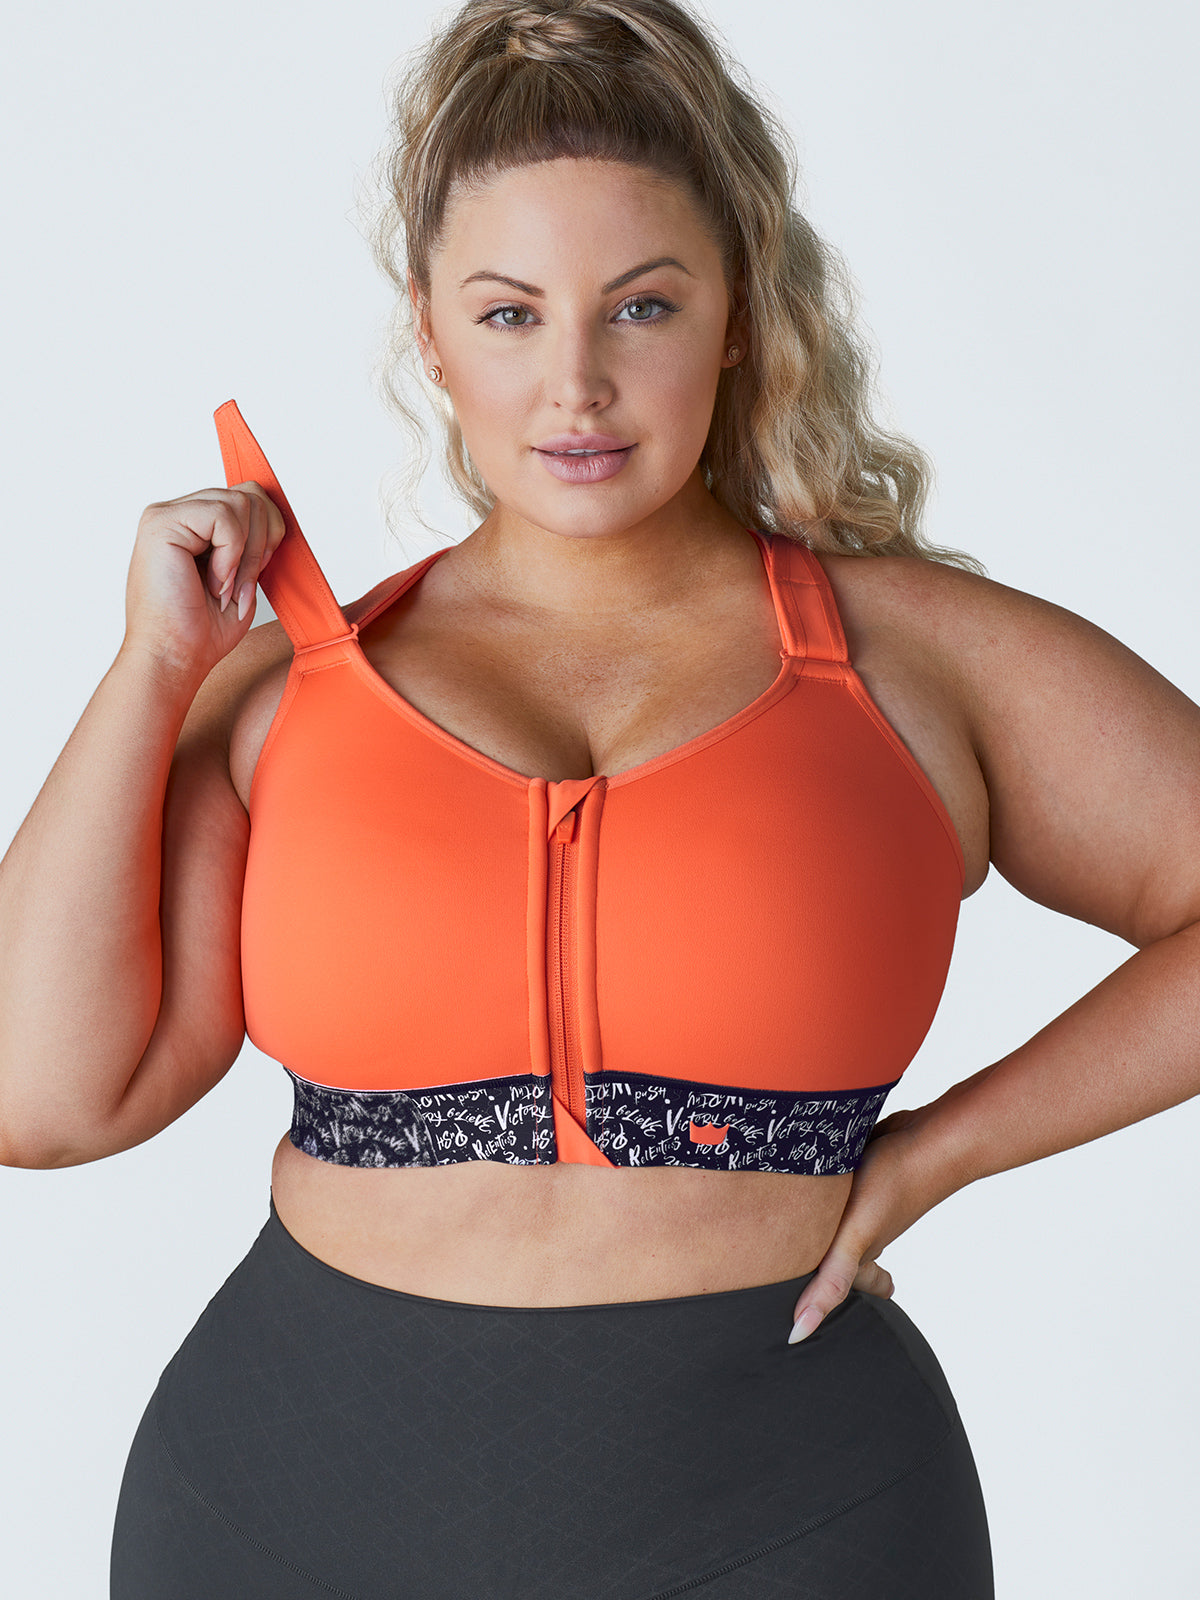 SHEFIT - “I am absolutely in love with the Ultimate Flex! This bra